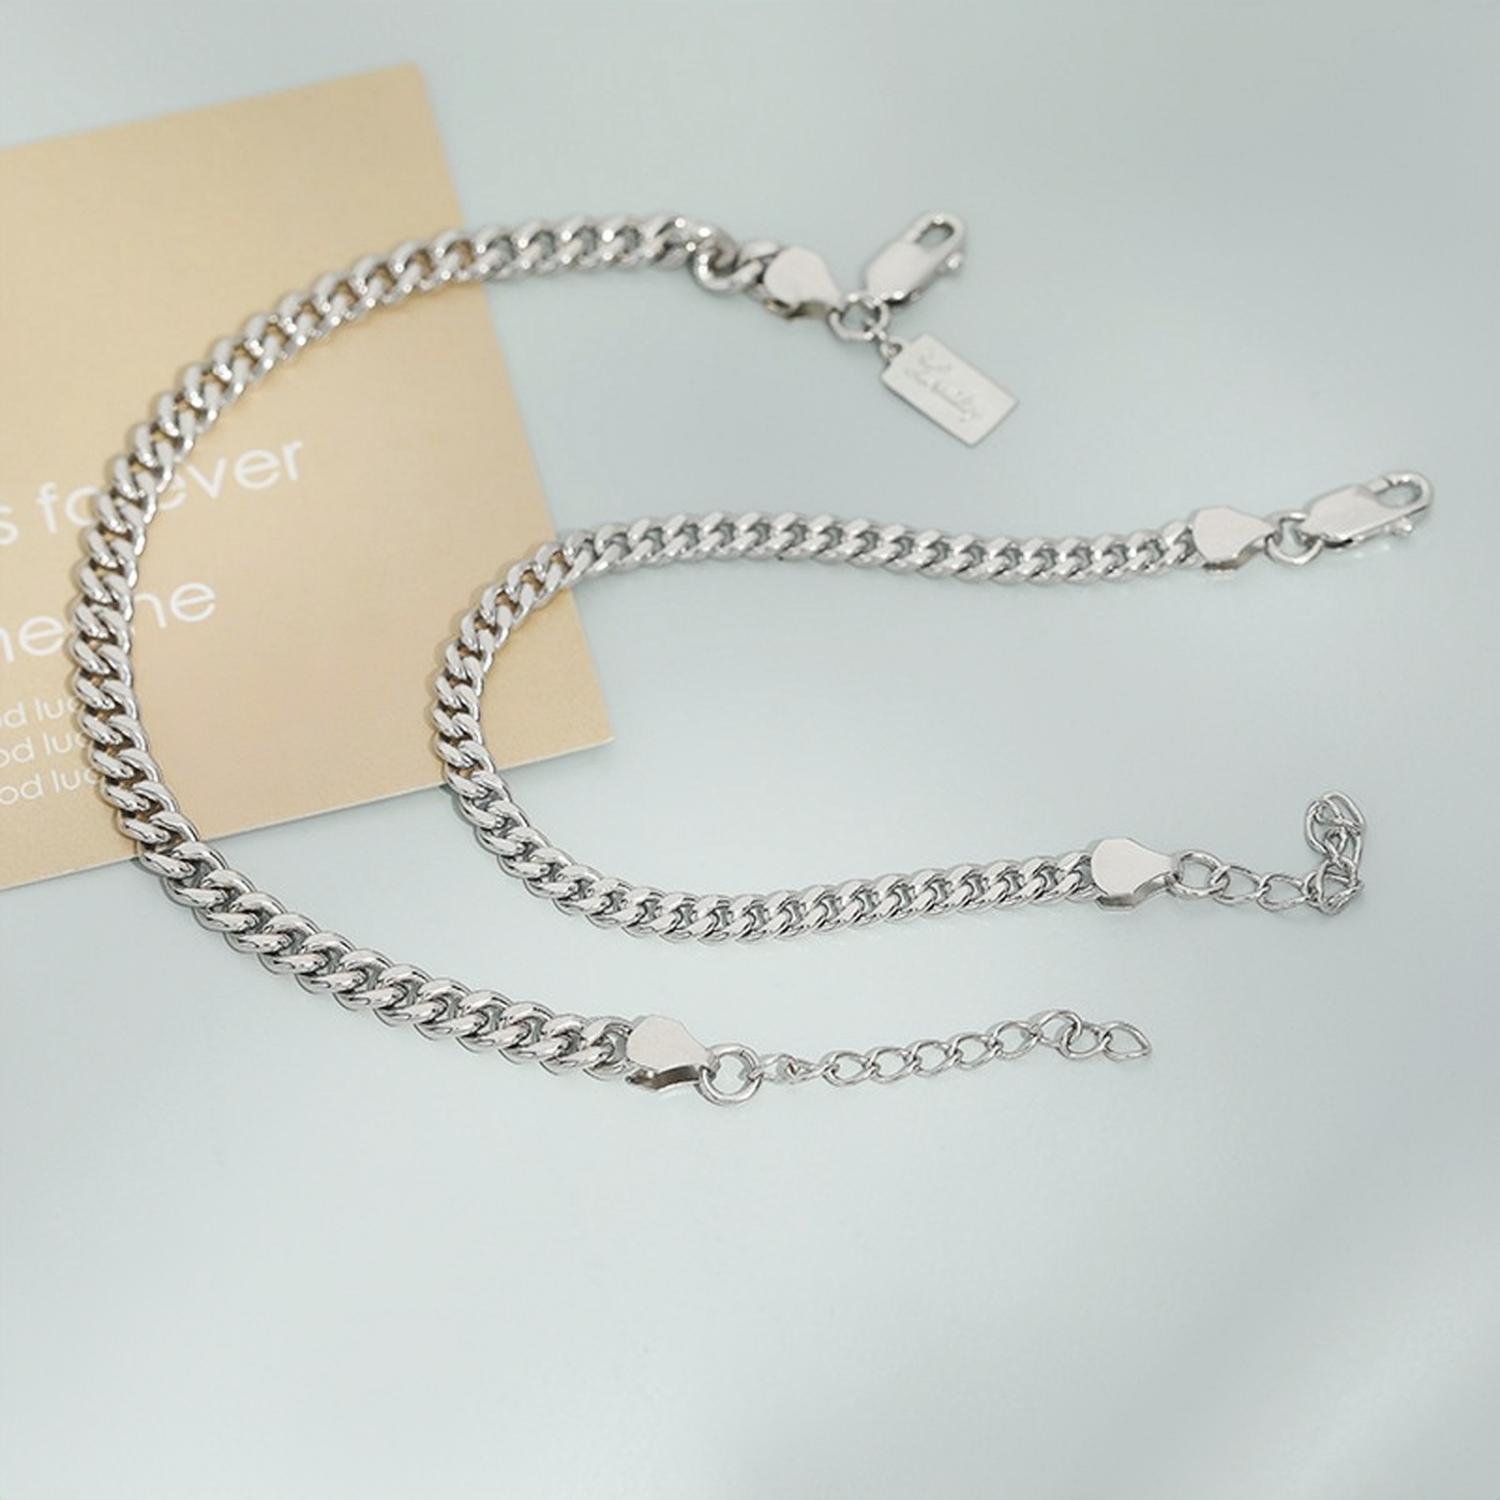 Simple Cuban Chain Bracelets For Couples In Sterling Silver - CoupleSets